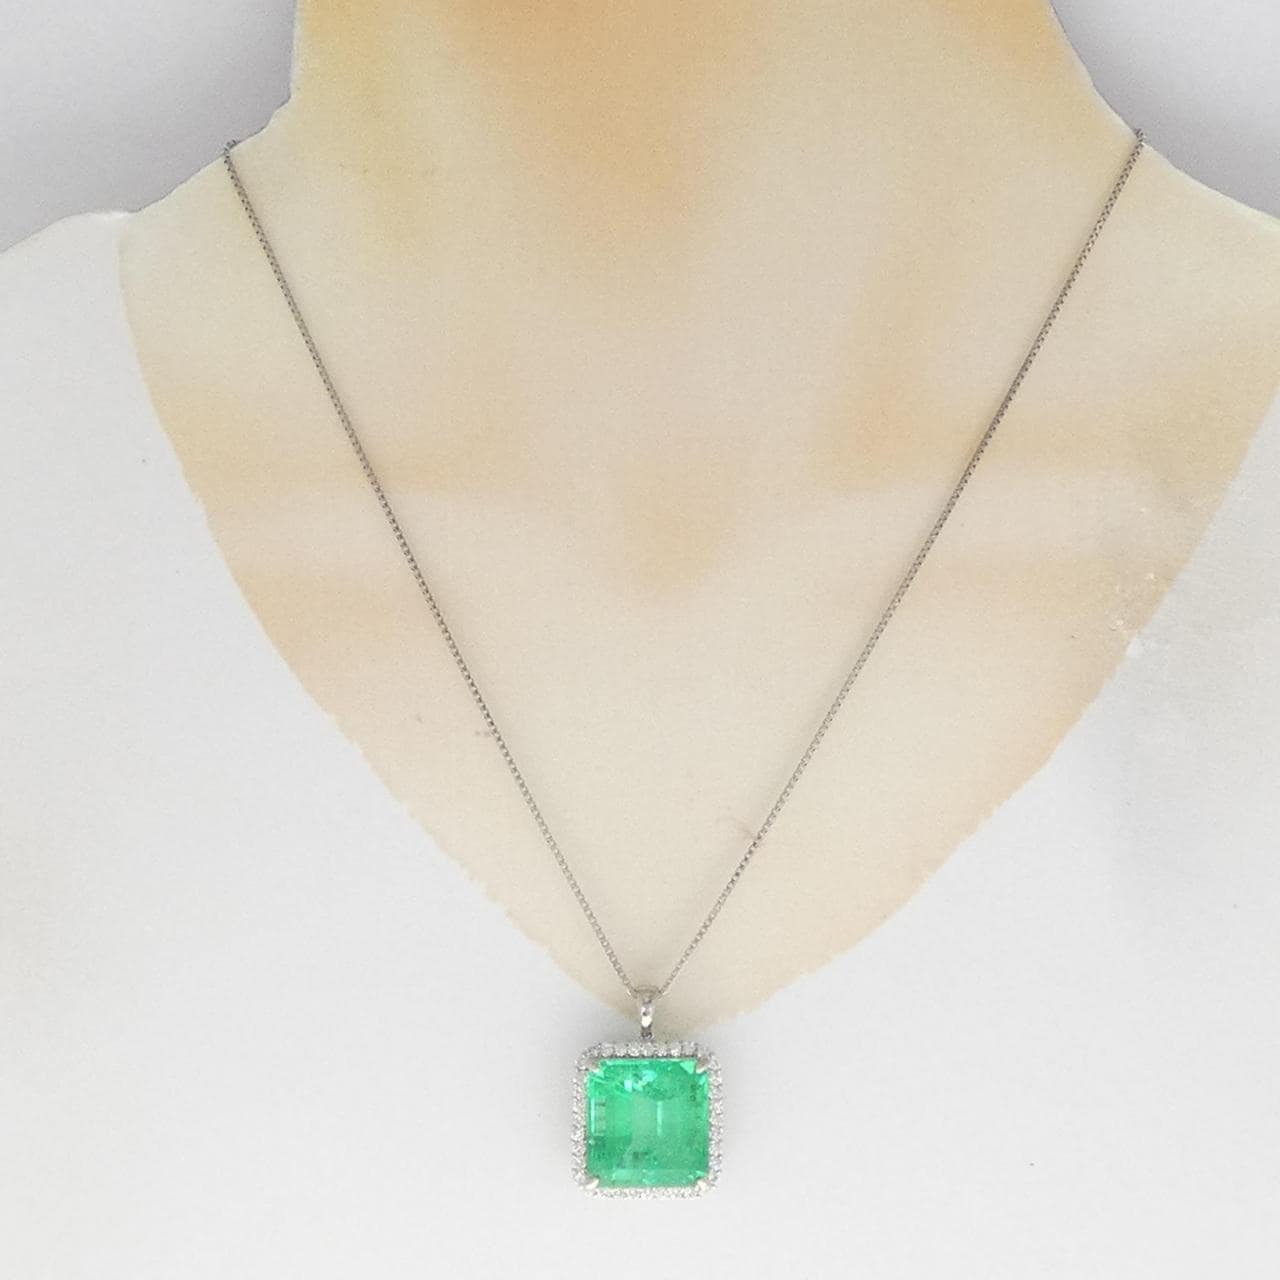 [Remake] PT Emerald Necklace 19.122CT Made in Colombia